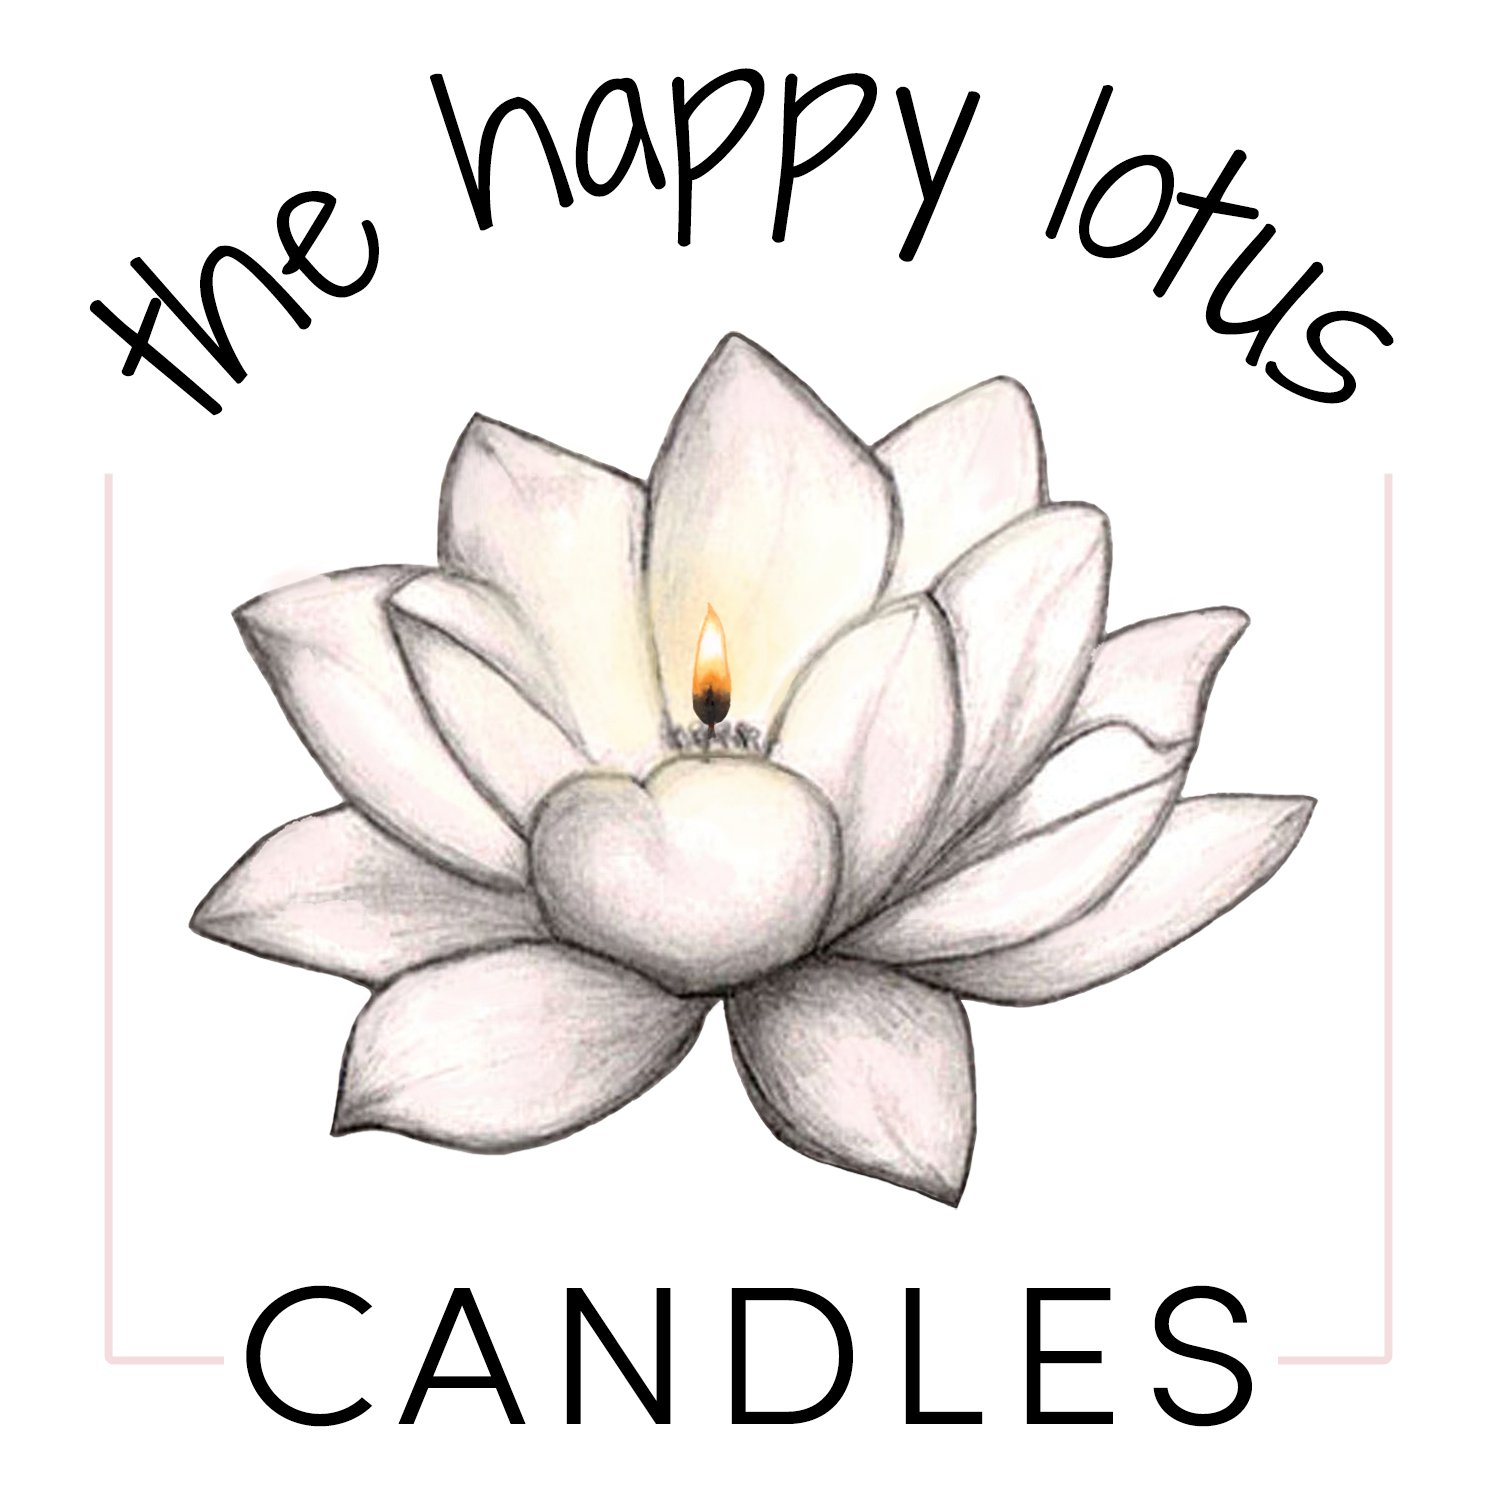 The Happy Lotus Candles